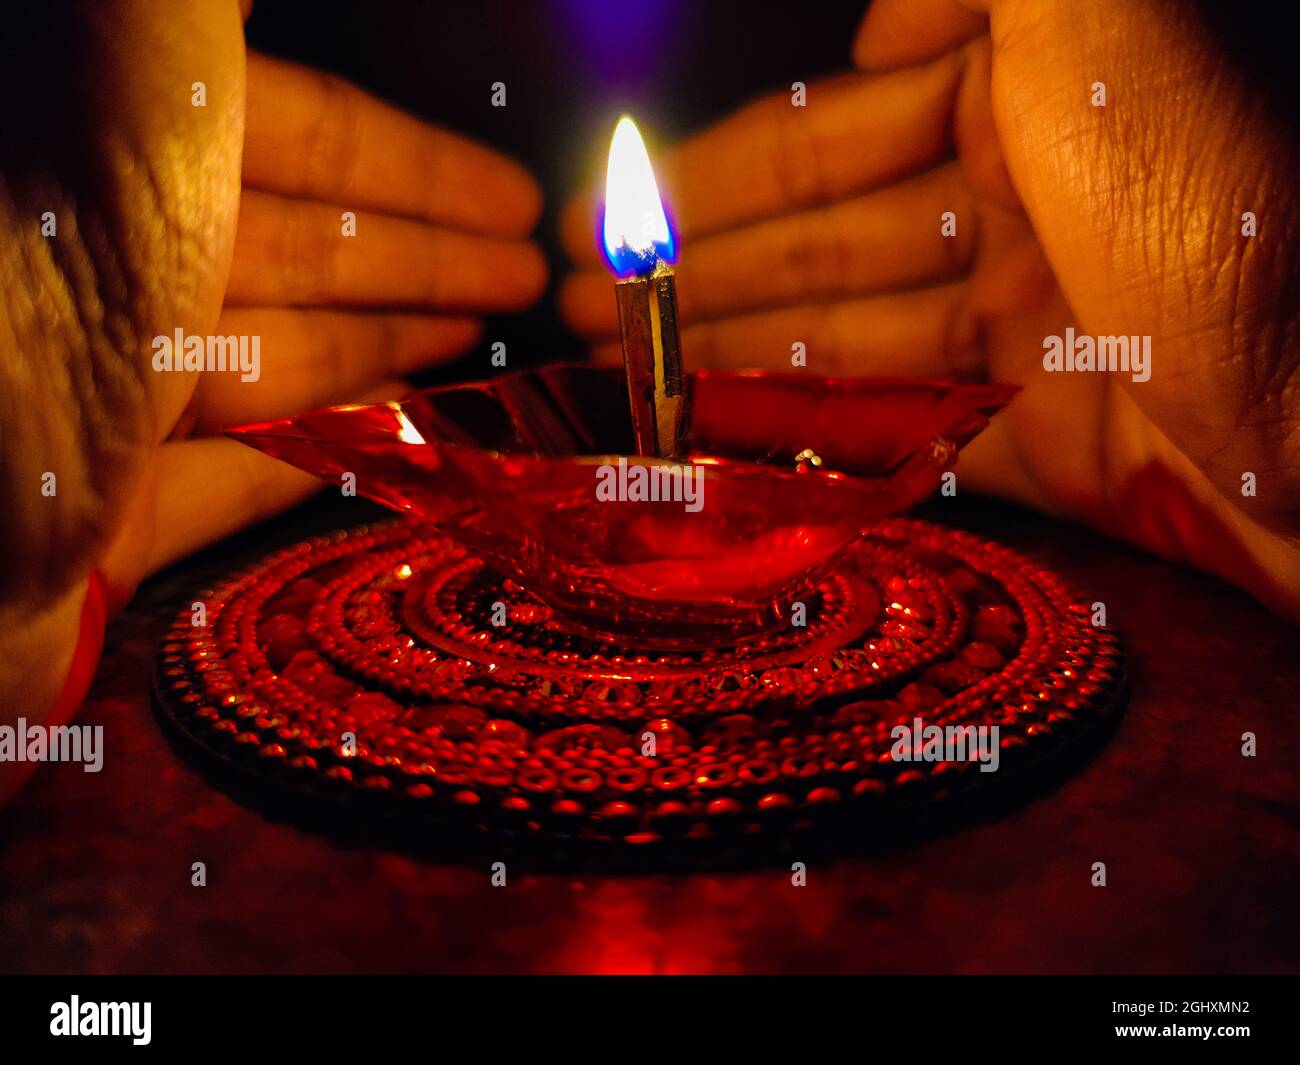 Person holding a clay oil lamp in the dark during the festival of lights at Bangalore, India Stock Photo